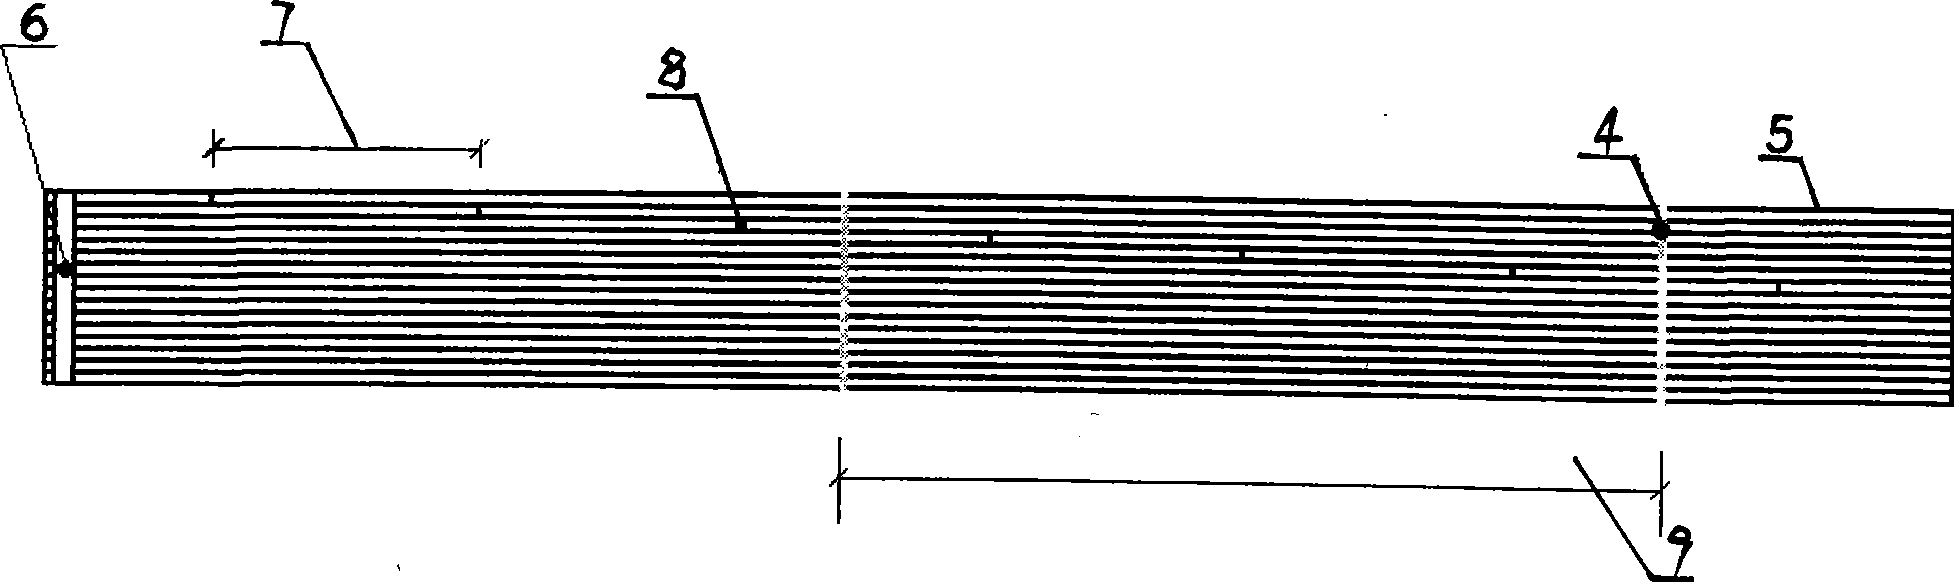 Method for producing bamboo thread sheet material